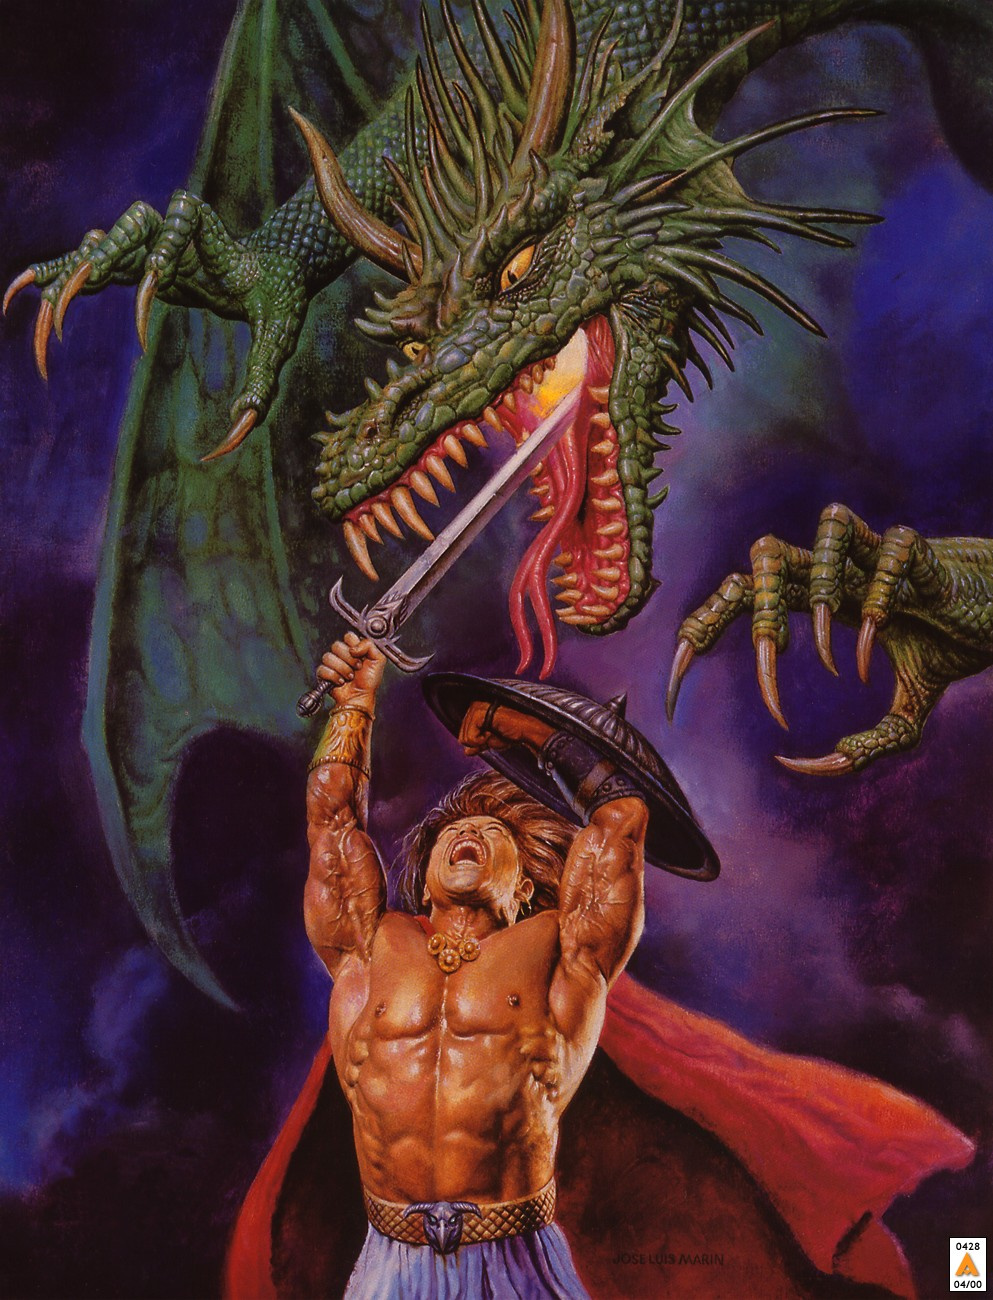 Jose Luis Marin. The battle with the dragon